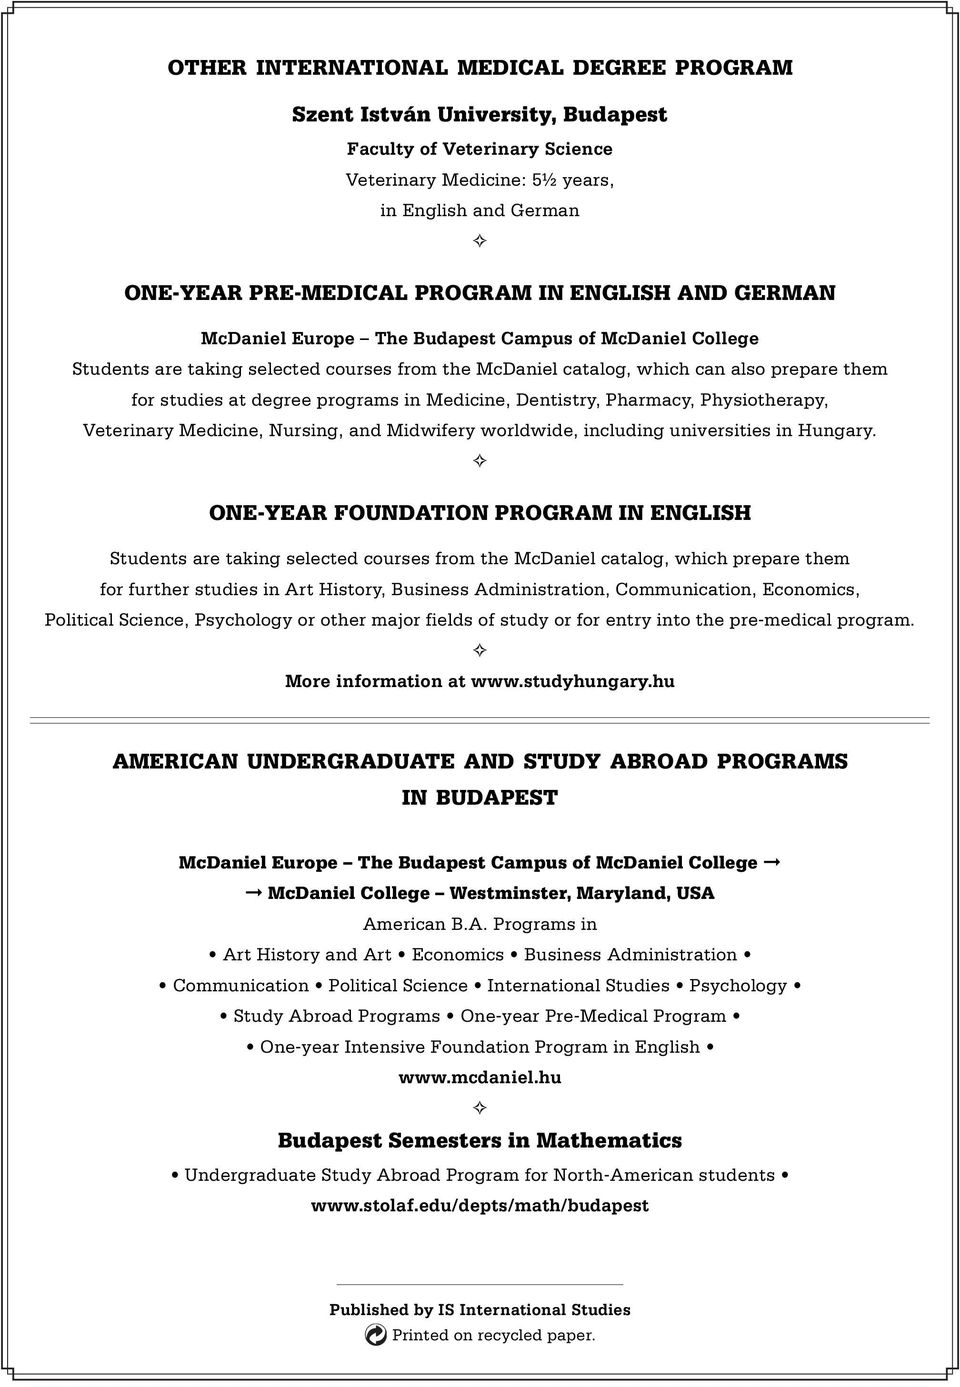 Medicine, Dentistry, Pharmacy, Physiotherapy, Veterinary Medicine, Nursing, and Midwifery worldwide, including universities in Hungary.